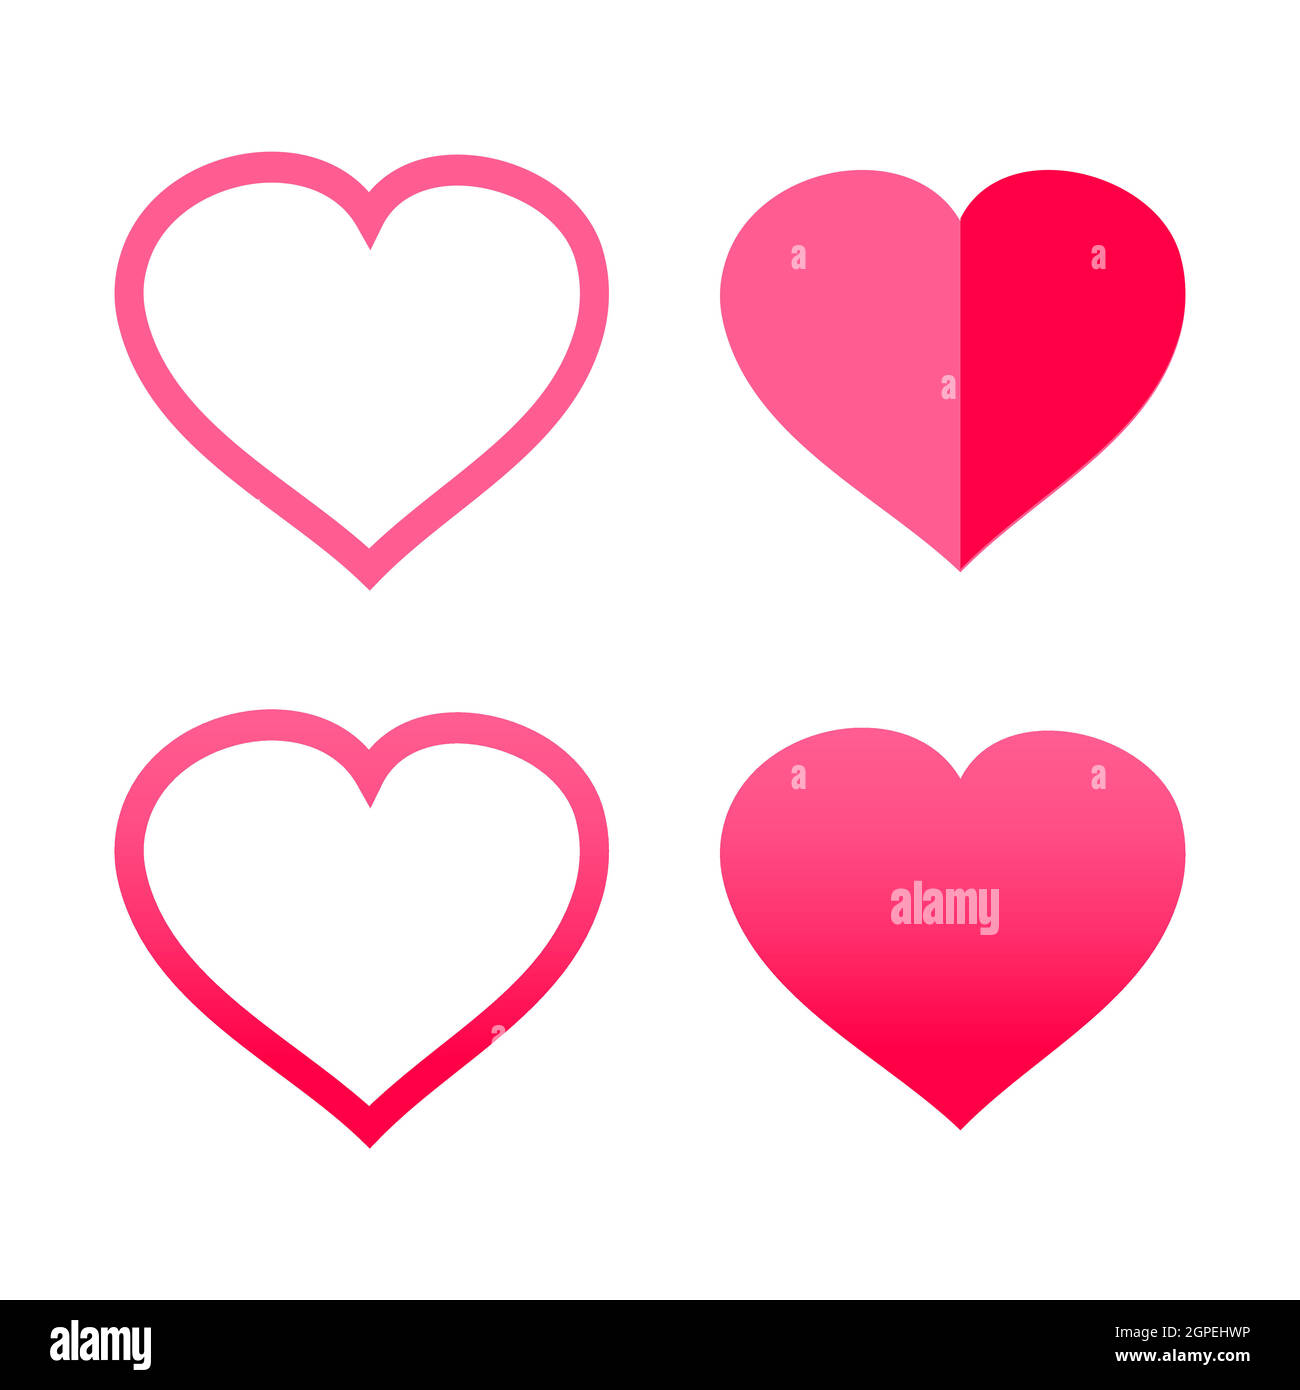 Heart Shaped Icons Vector Art & Graphics